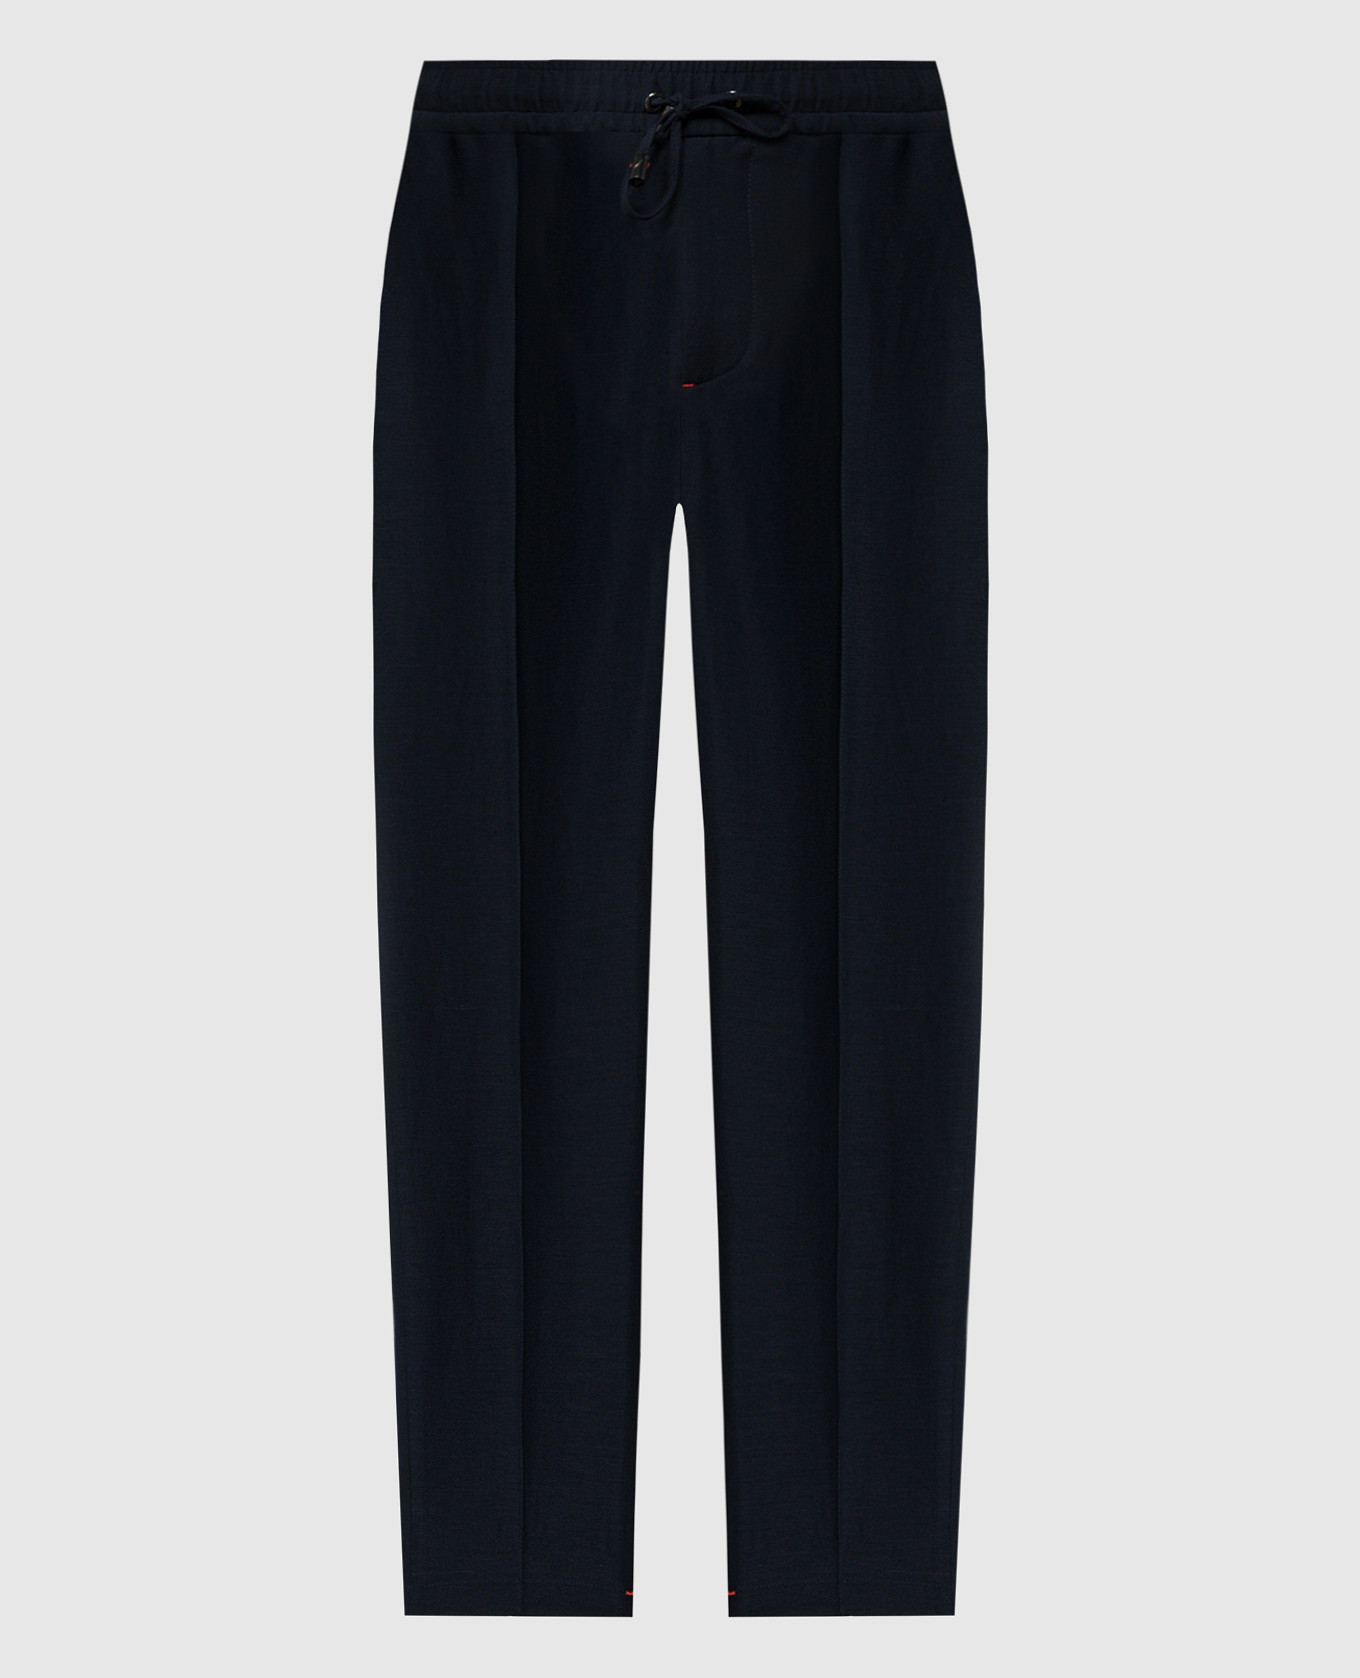 Blue wool and linen trousers with logo embroidery